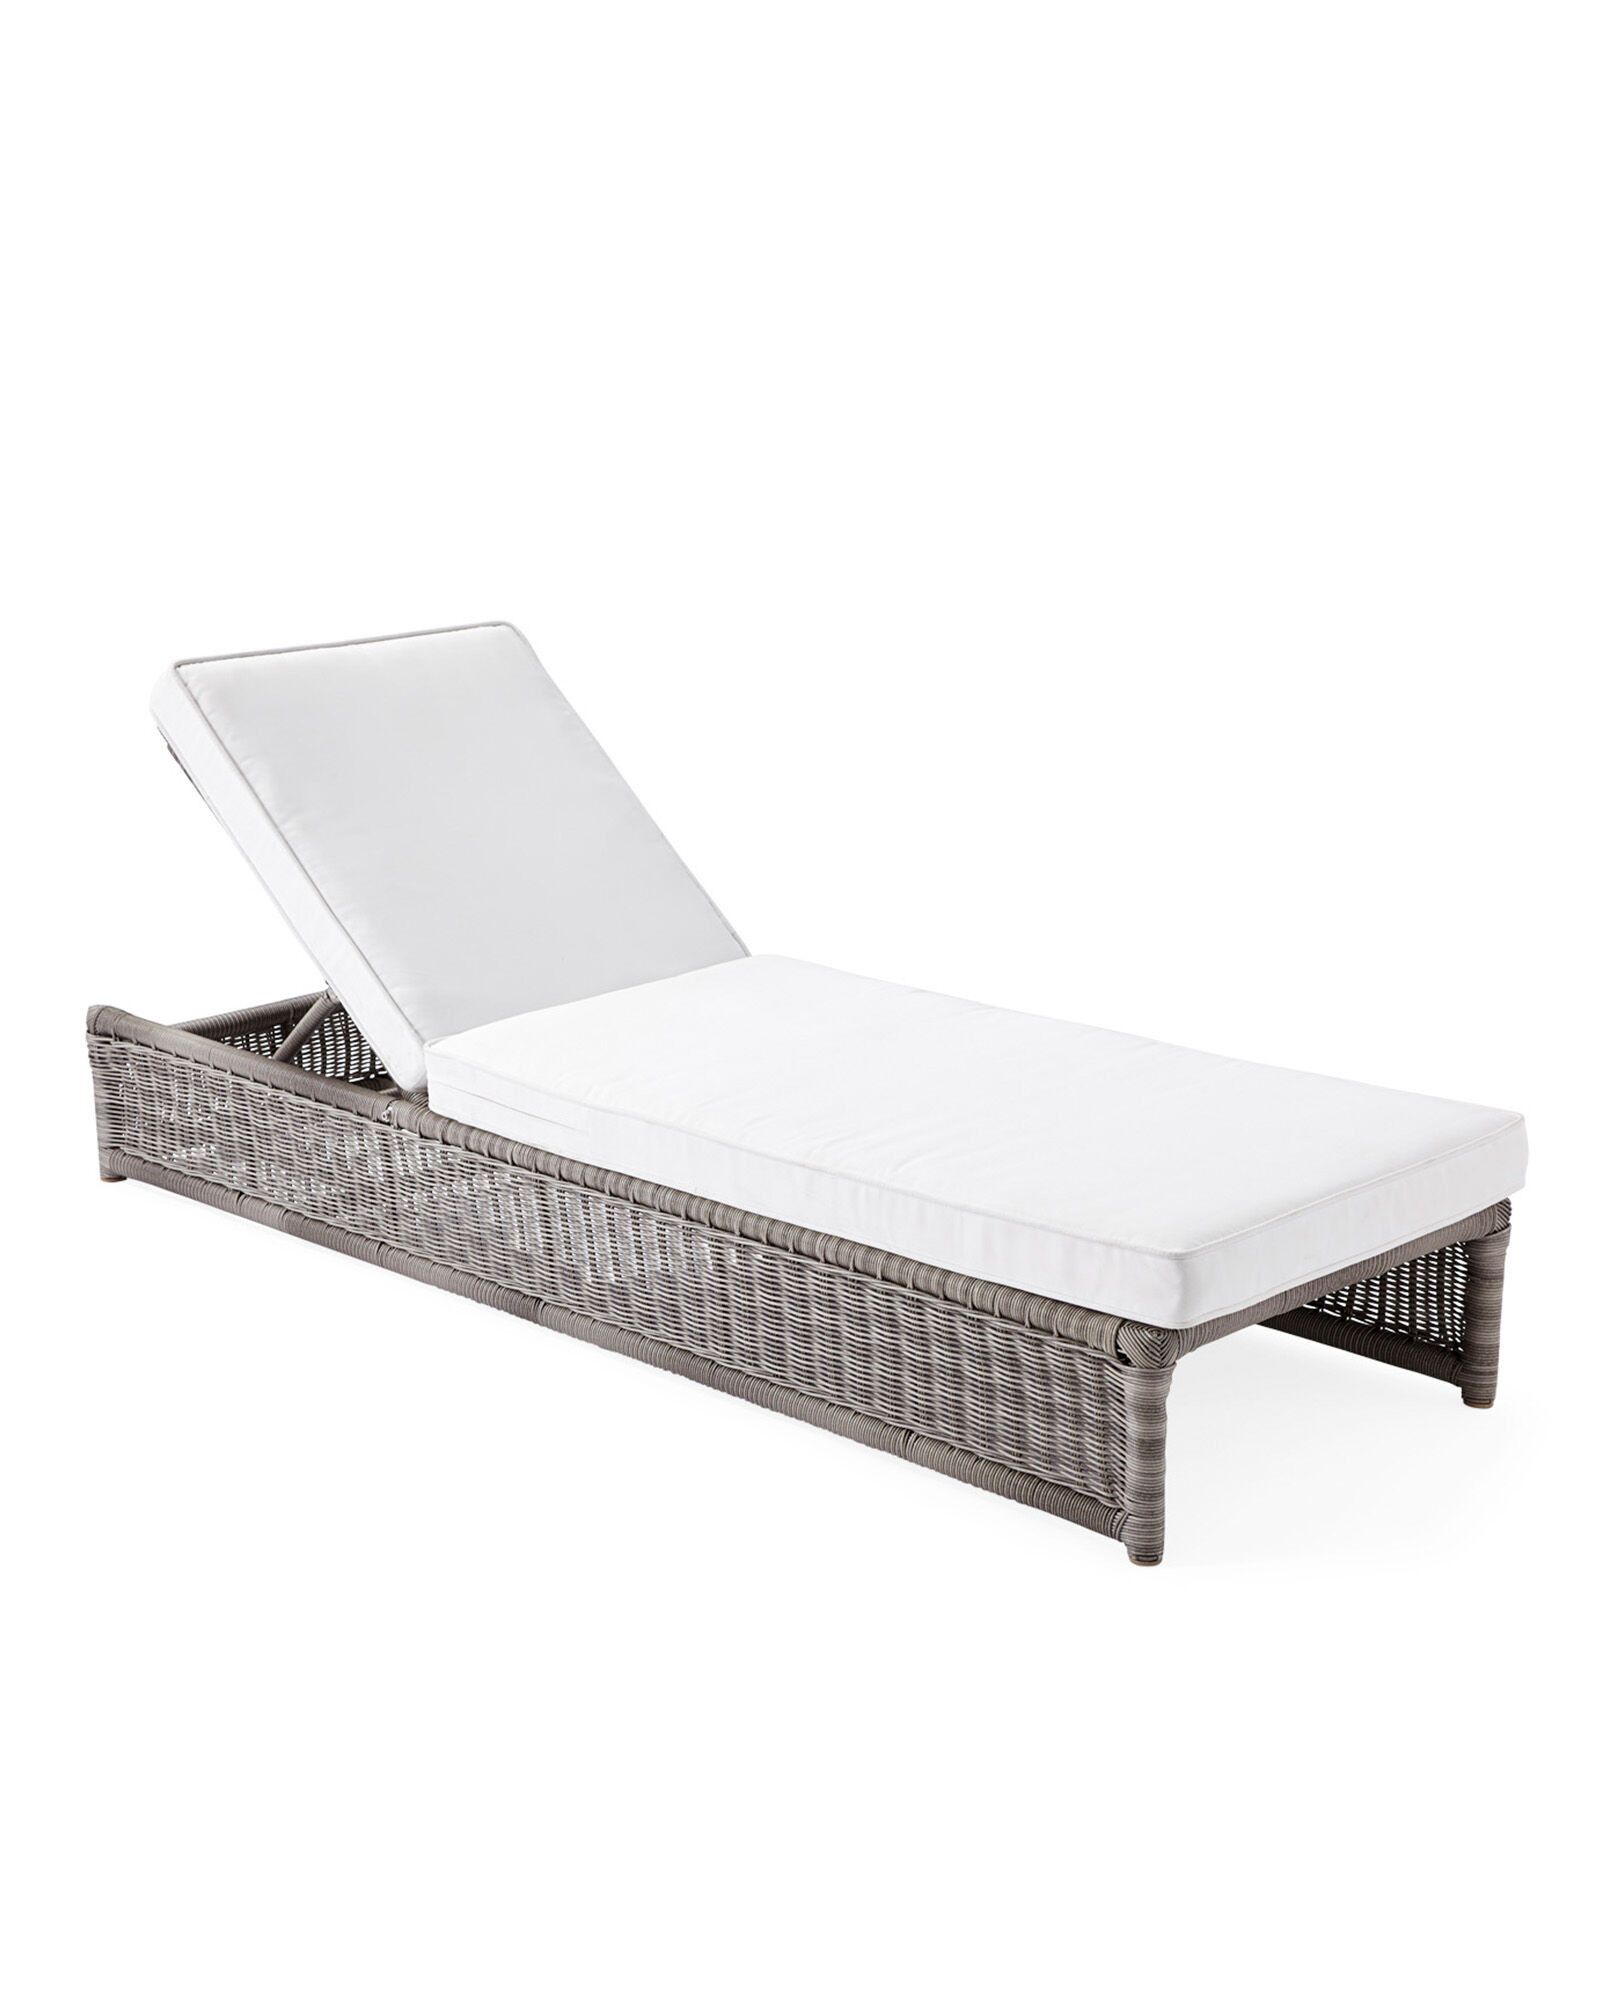 Pacifica Chaise - Harbor Grey | Serena and Lily